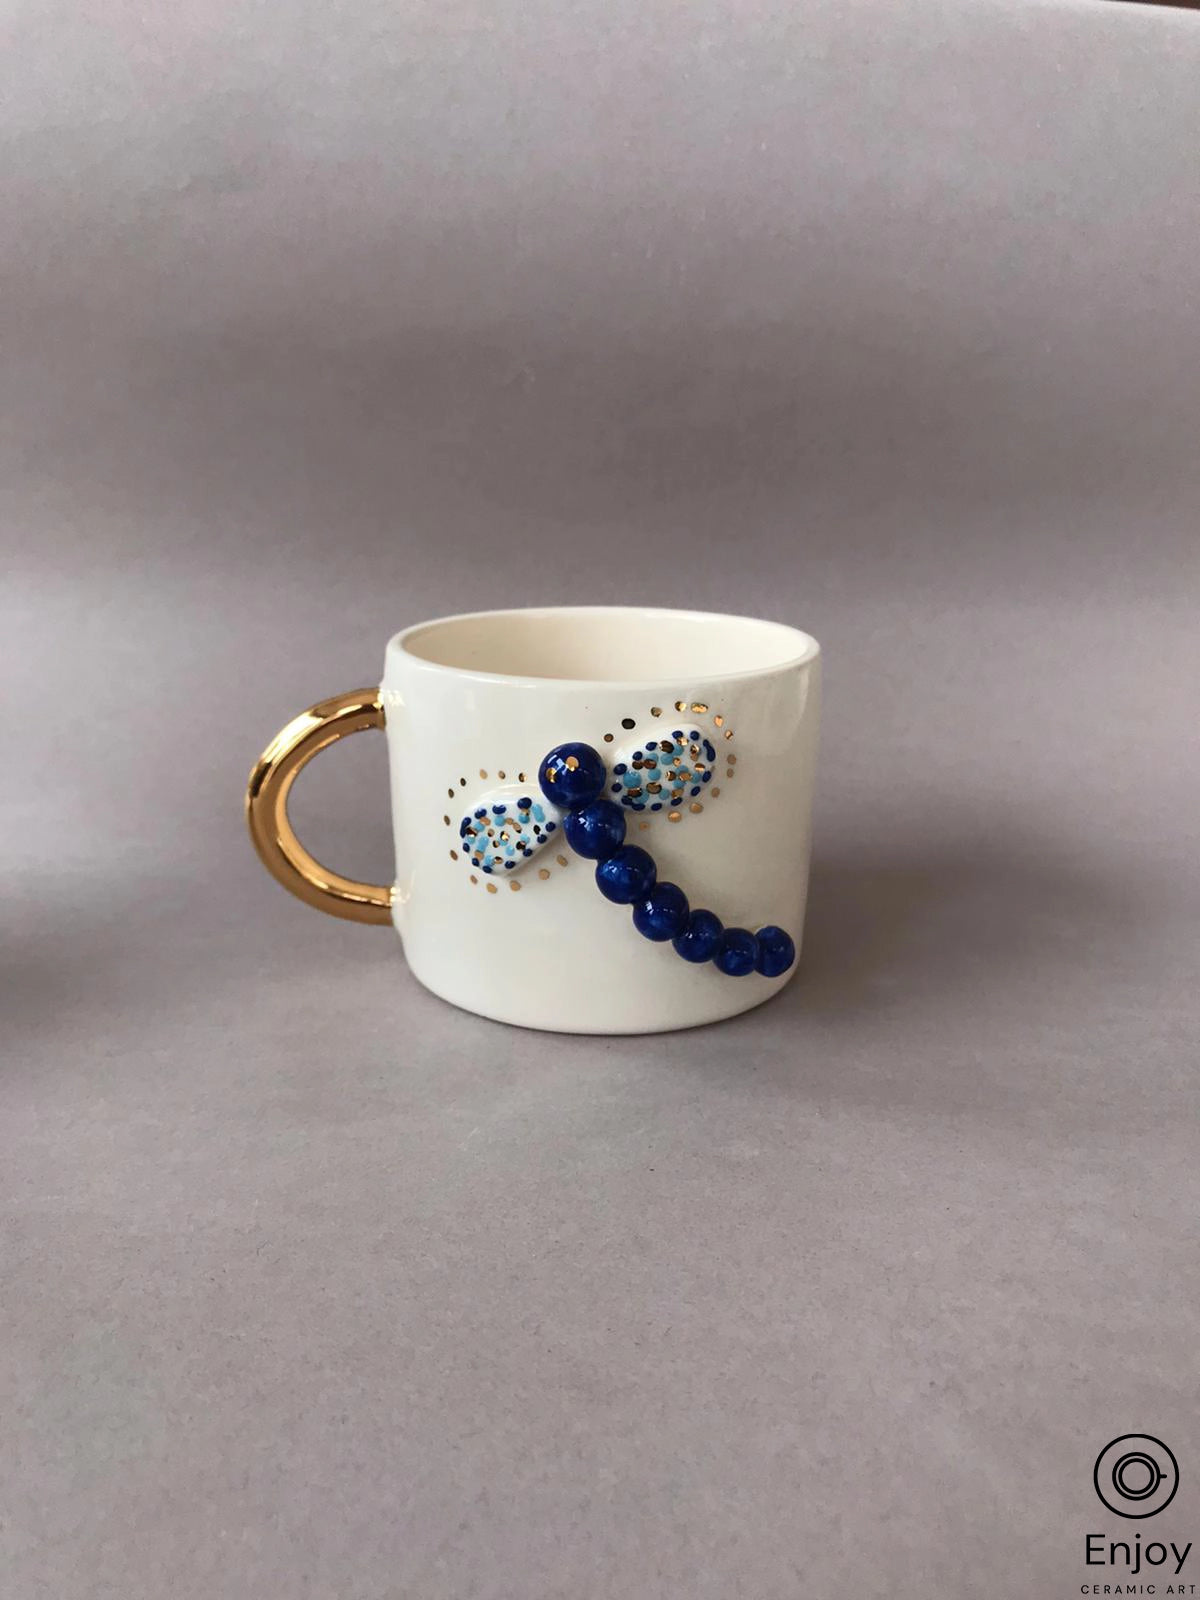 Handmade Blue Dragonfly Mug With Gold Handle 10 oz - Dragonfly Coffee Mug, Dragonfly Gifts For Women, Dragonfly Lover Gifts